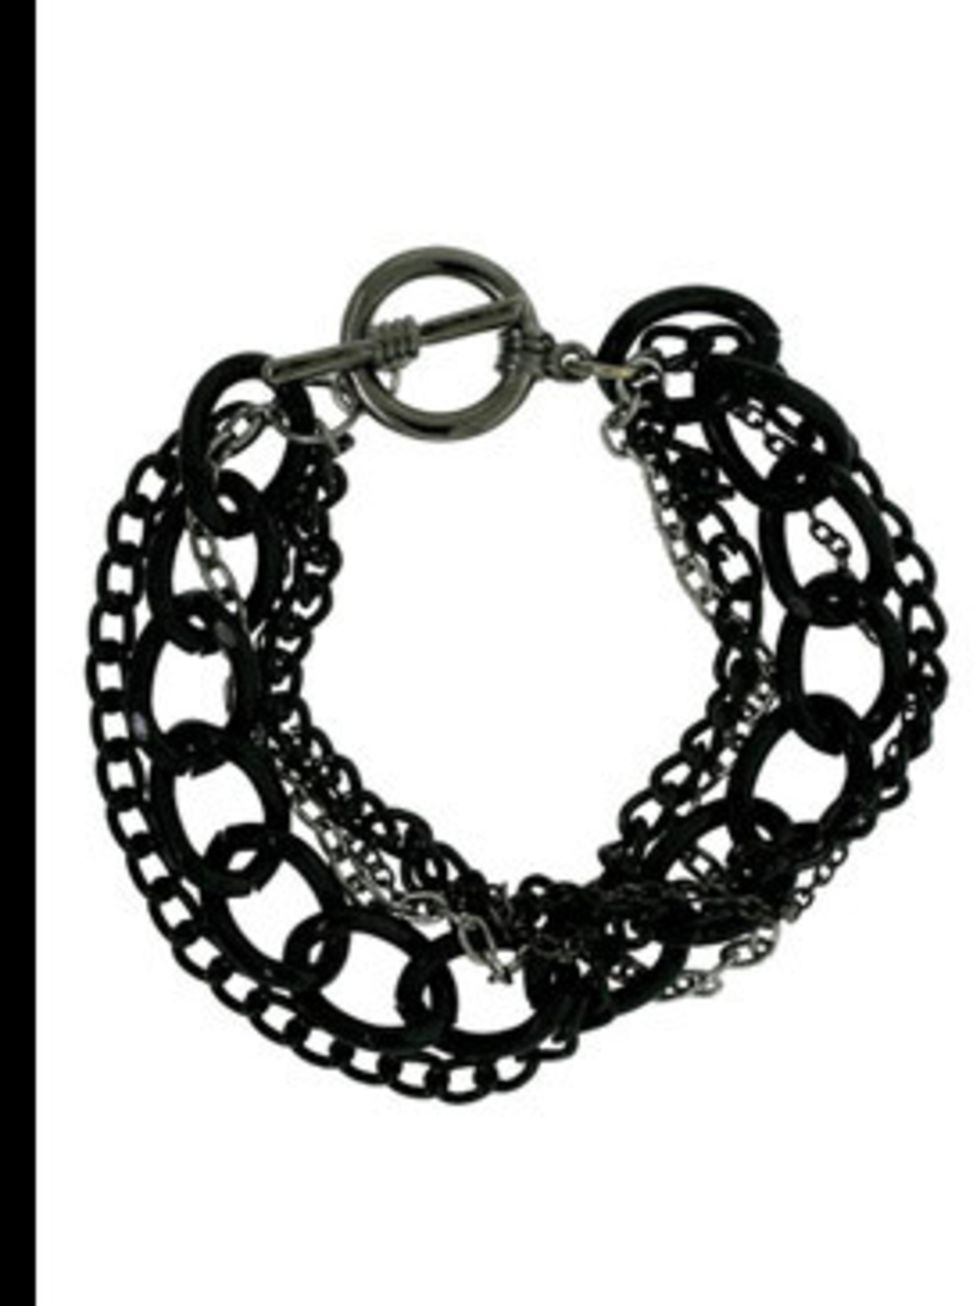 <p>Bracelet, £85 by Dirty Librarian Chains at <a href="http://www.kabiri.co.uk/jewellery/new-in/flags-of-wrath-bracelet.html">Kabiri</a></p>